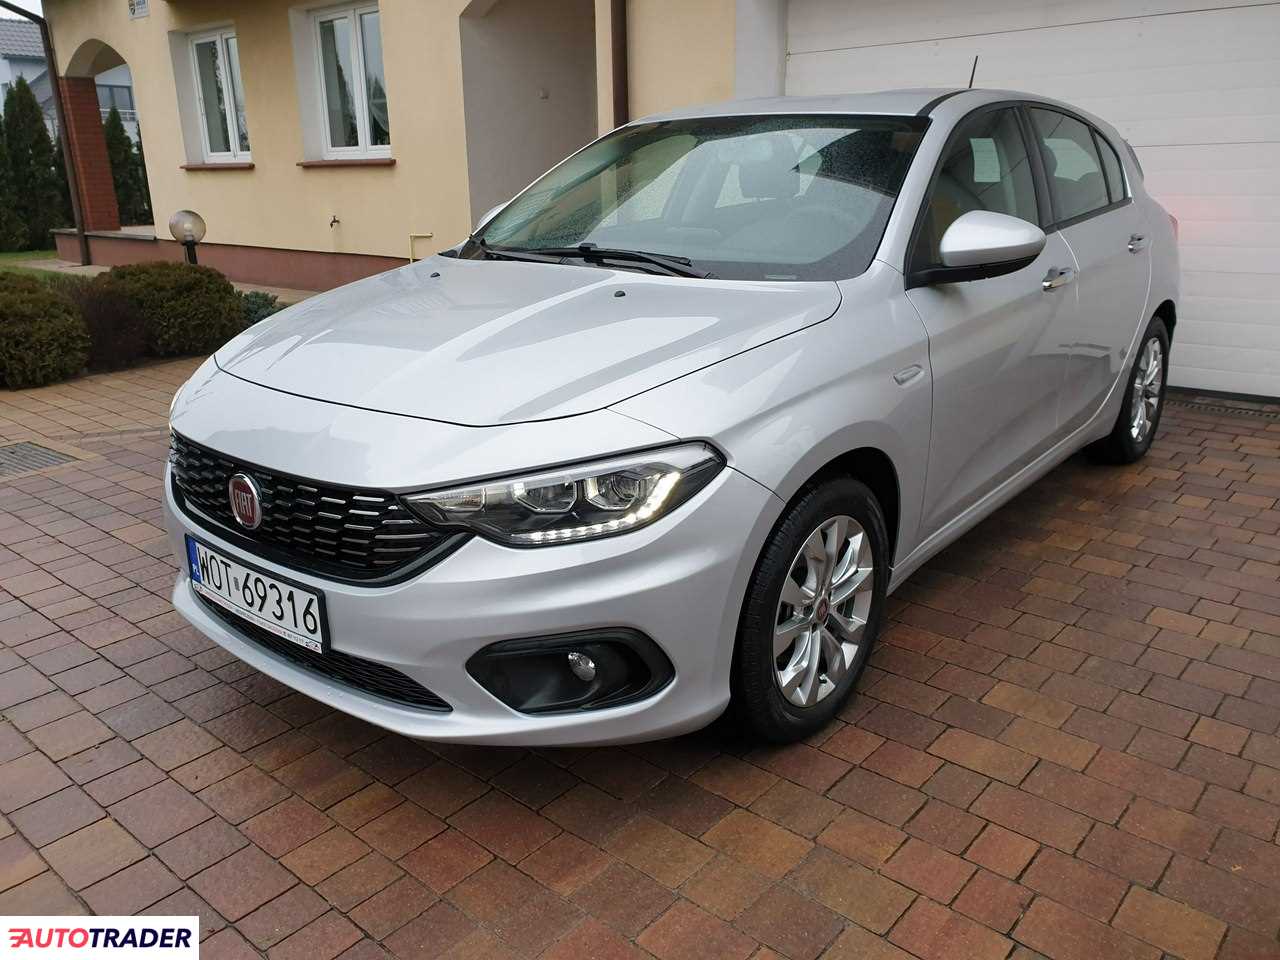 Fiat Tipo 1.4 benzyna 95 KM 2019r. archiwum Autotrader.pl